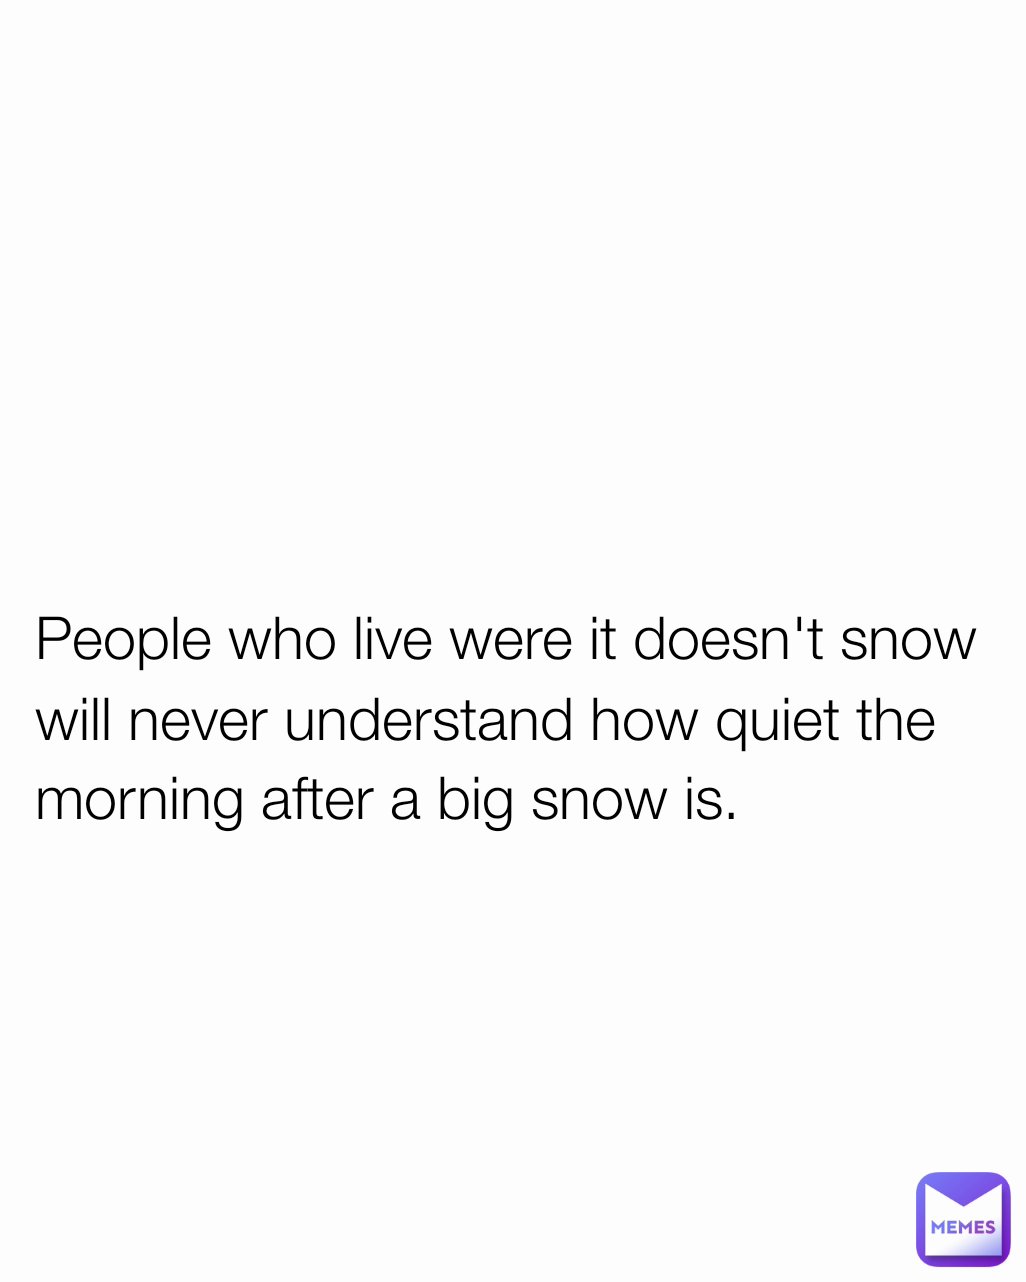 People who live were it doesn't snow will never understand how quiet the morning after a big snow is.